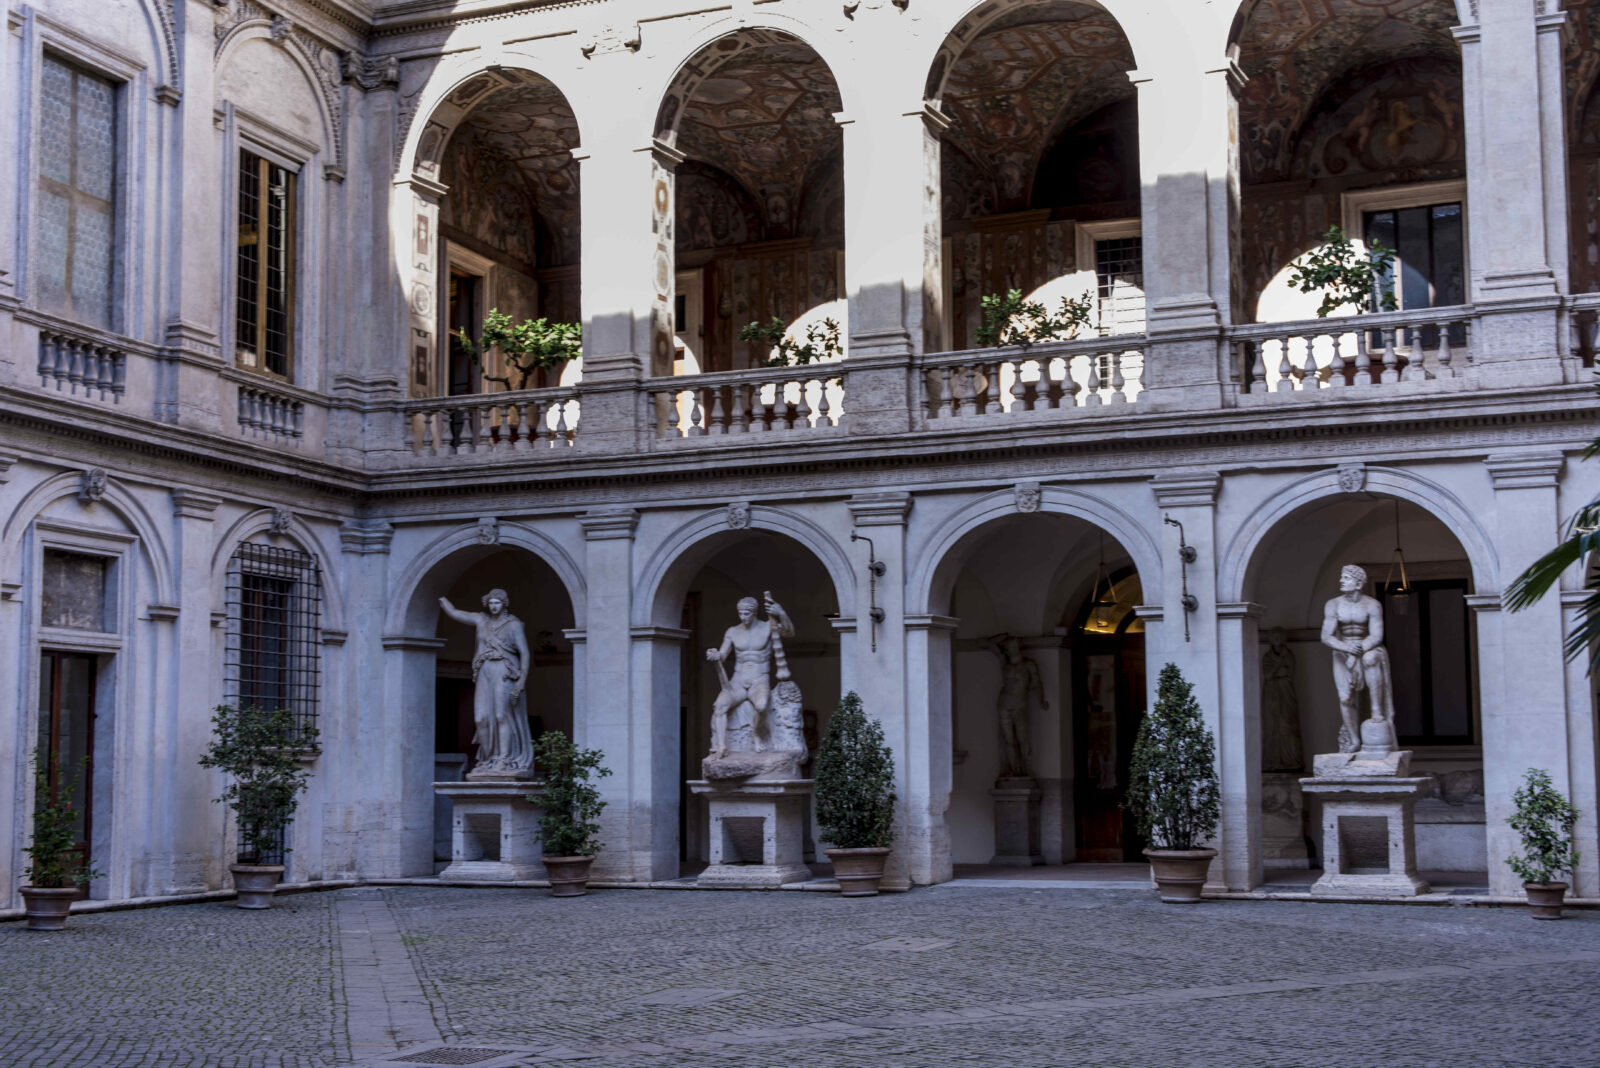 Courtyard of Palazzo Altemps